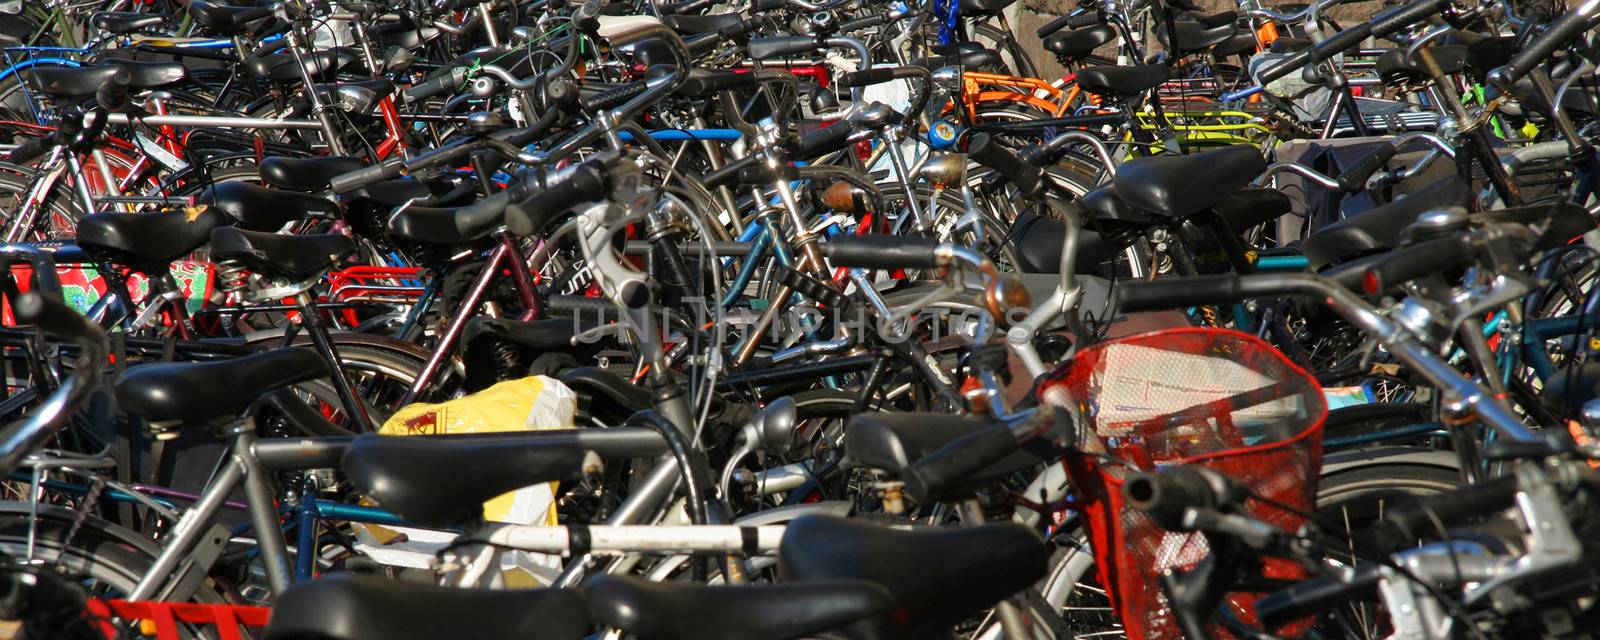 Hundreds of bikes parked on the sidewalk in Amsterdam.